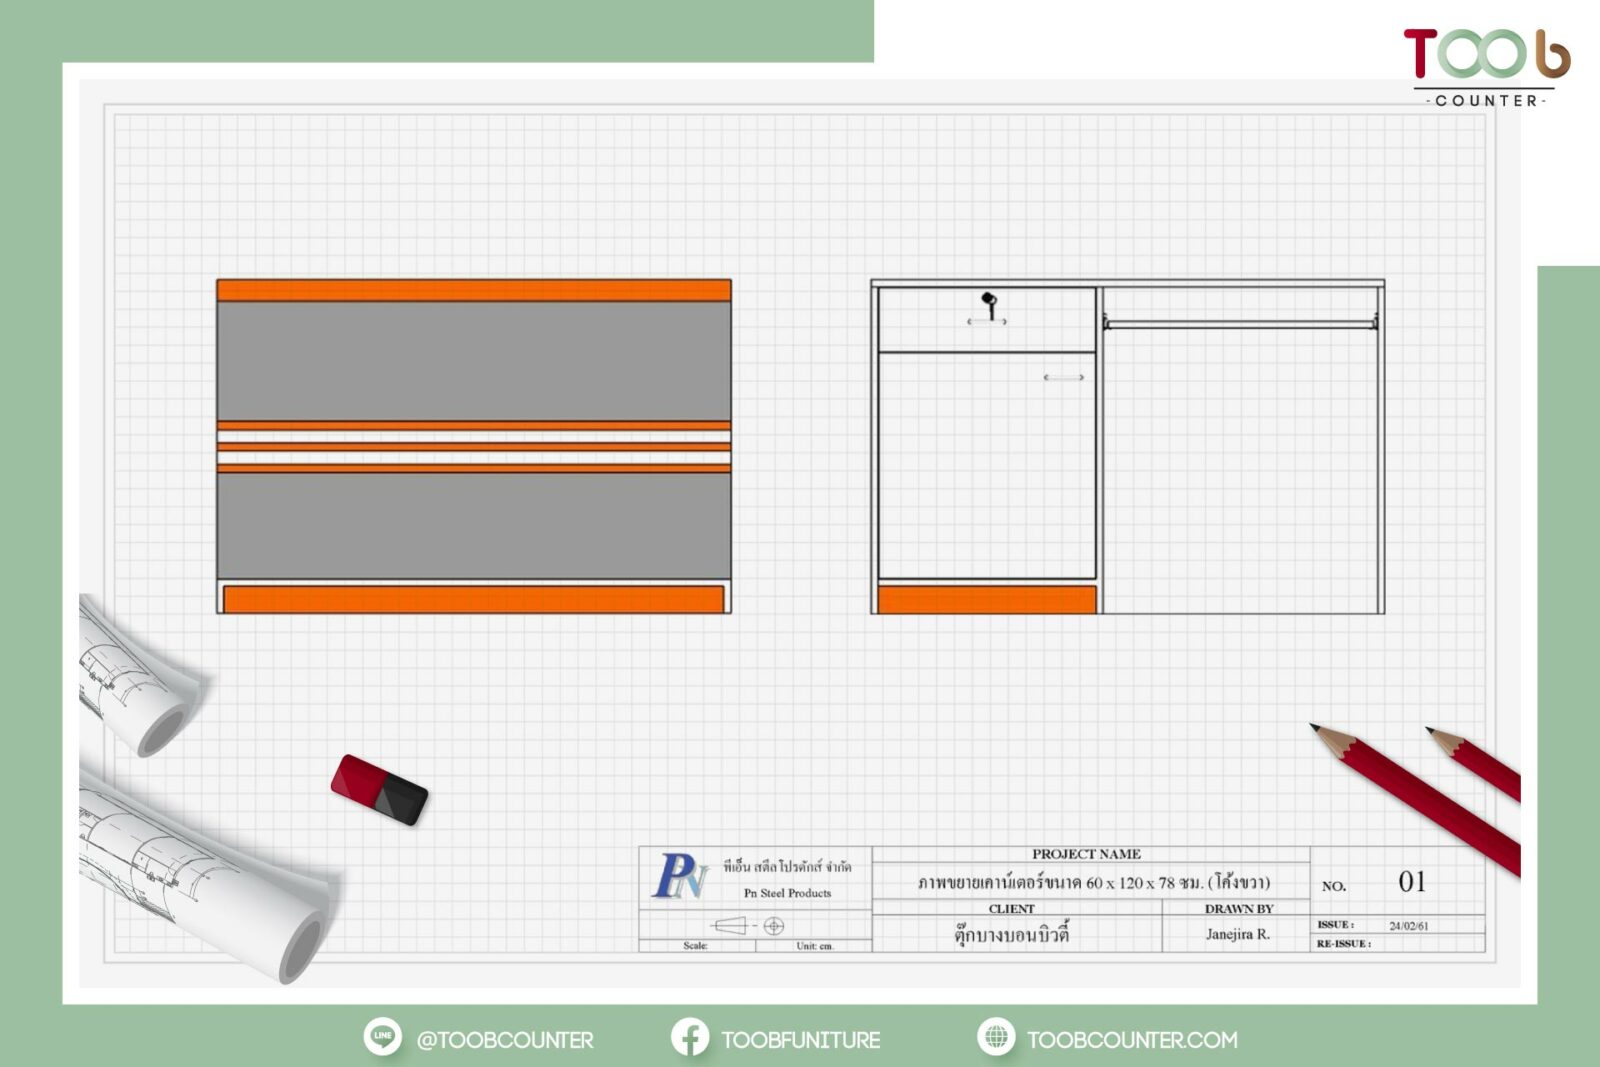 Drawing perspective view design small information counter grey orange